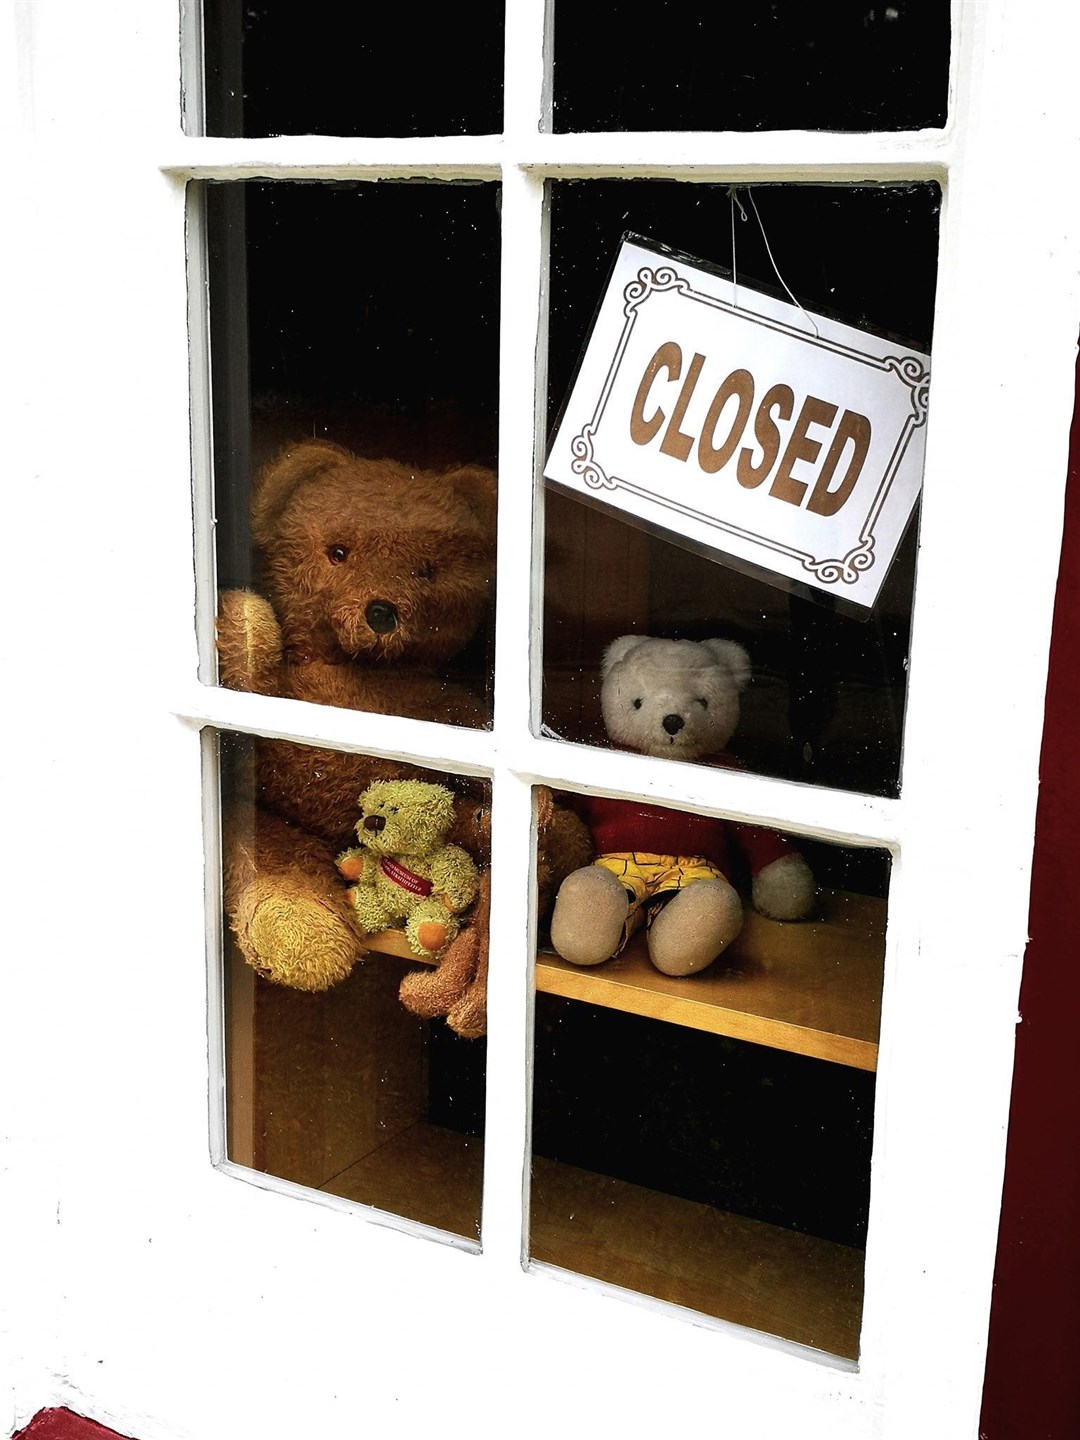 The Strathpeffer Museum of Childhood - closed because of Covid-19 but still seeking to cheer up kids.